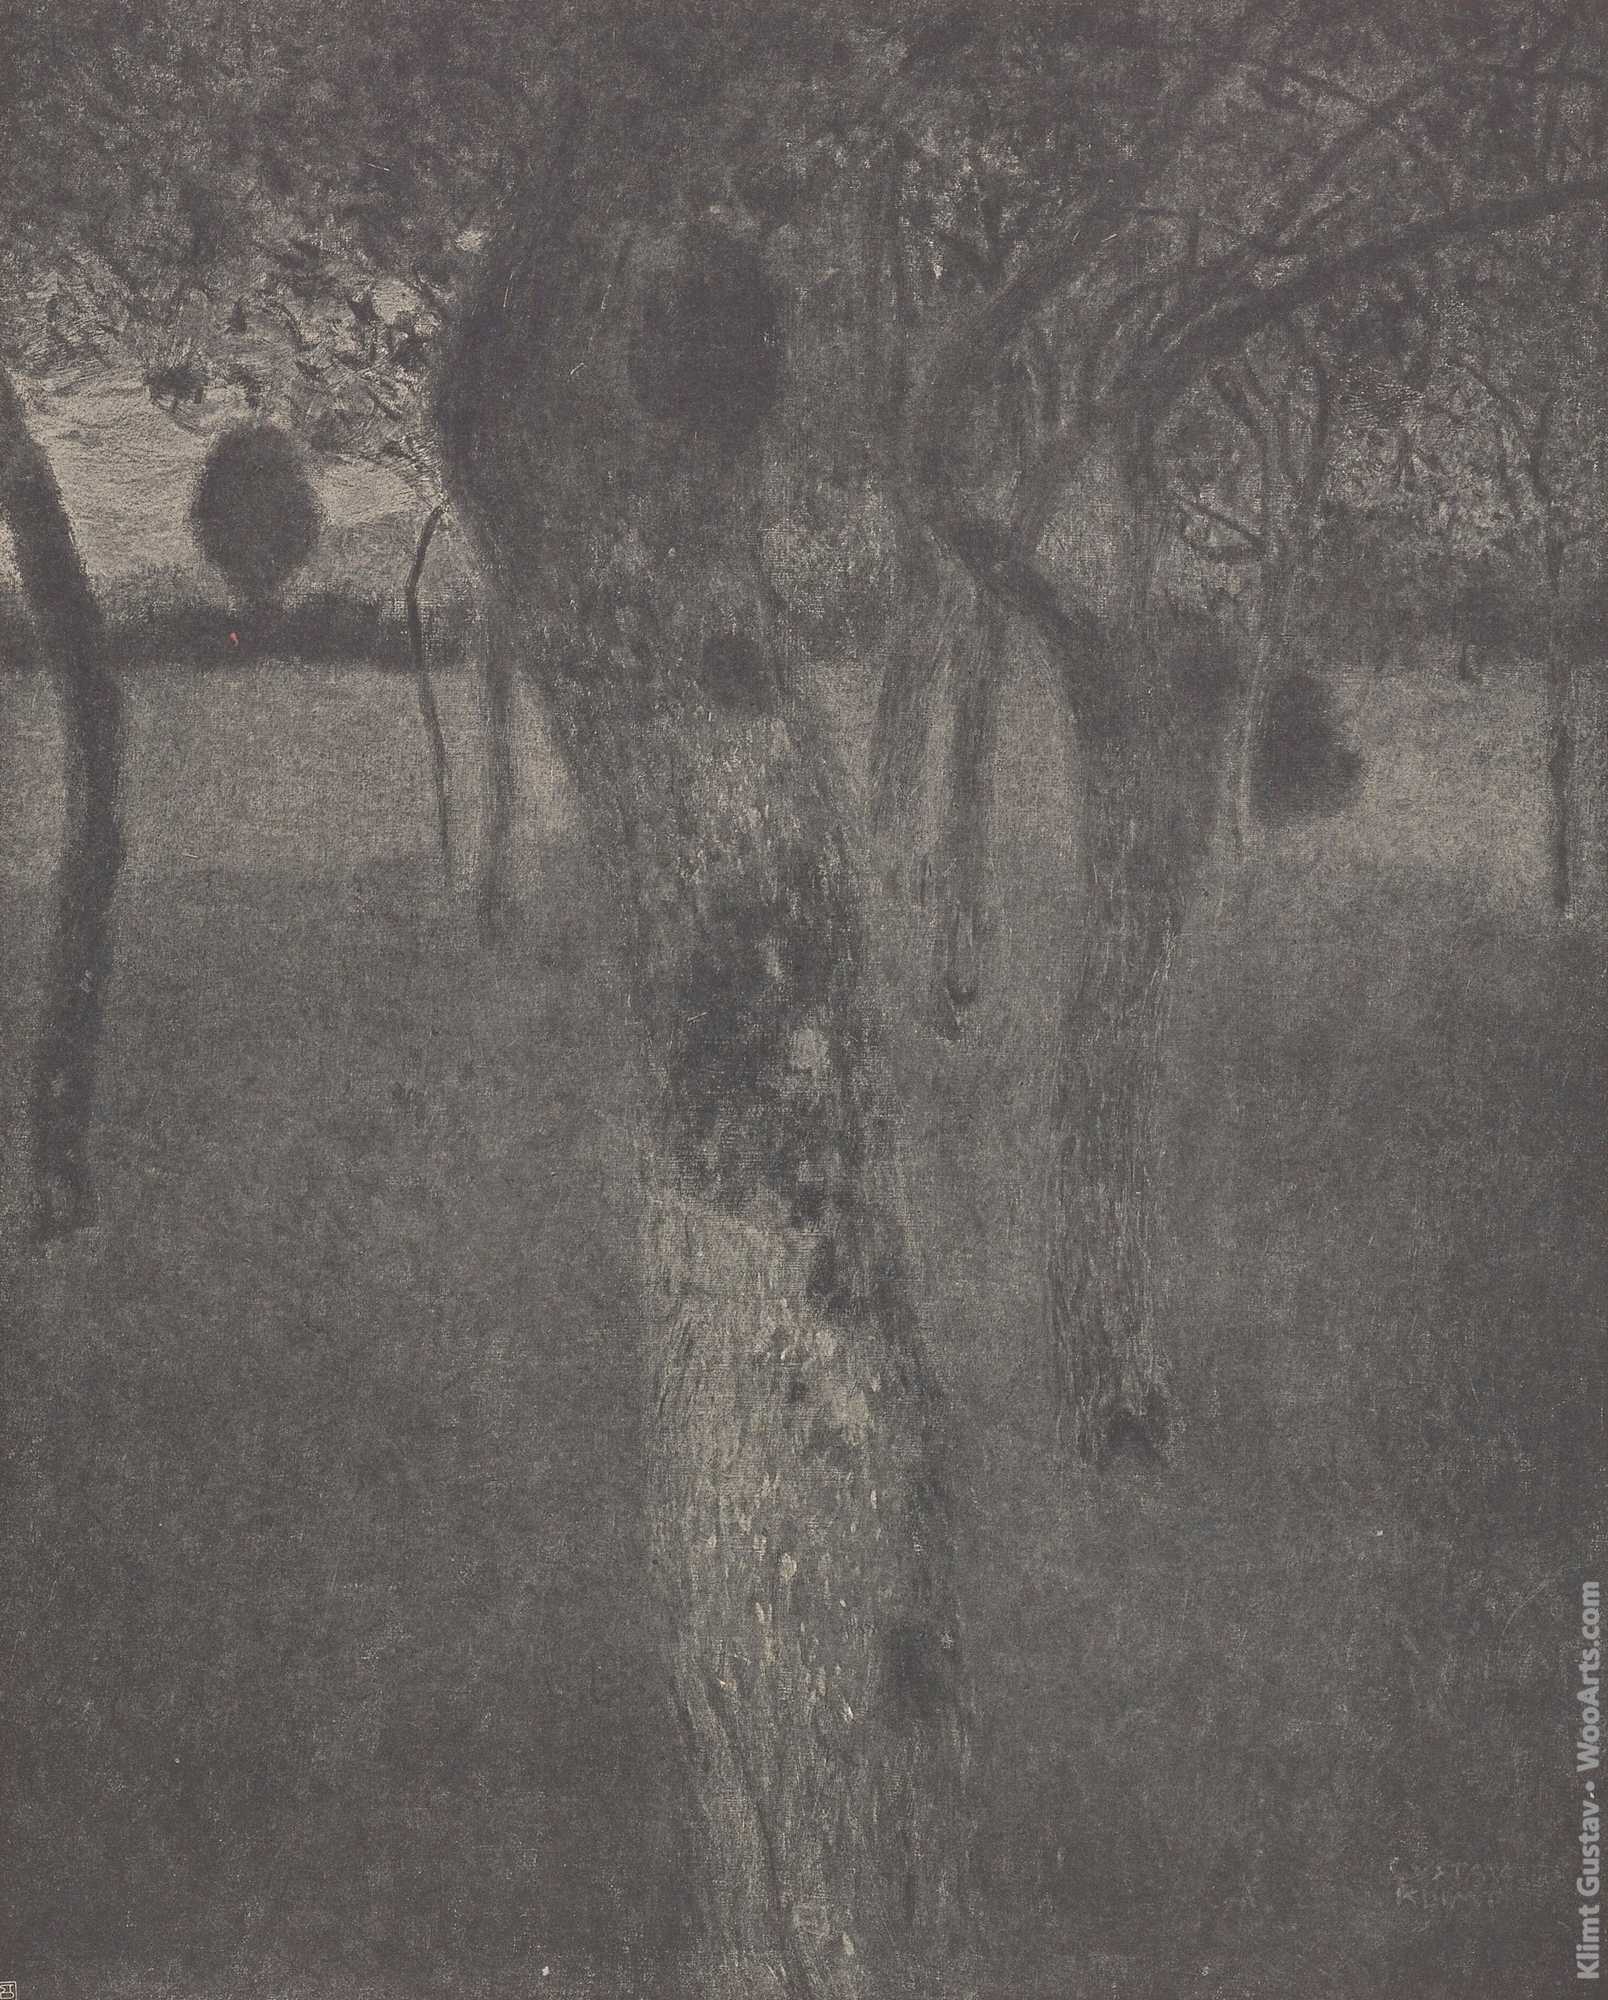 Fruit trees at the Attersee after Gustav Klimt, plate 35, The work of Gustav Klimt Gustav Klimt 1918